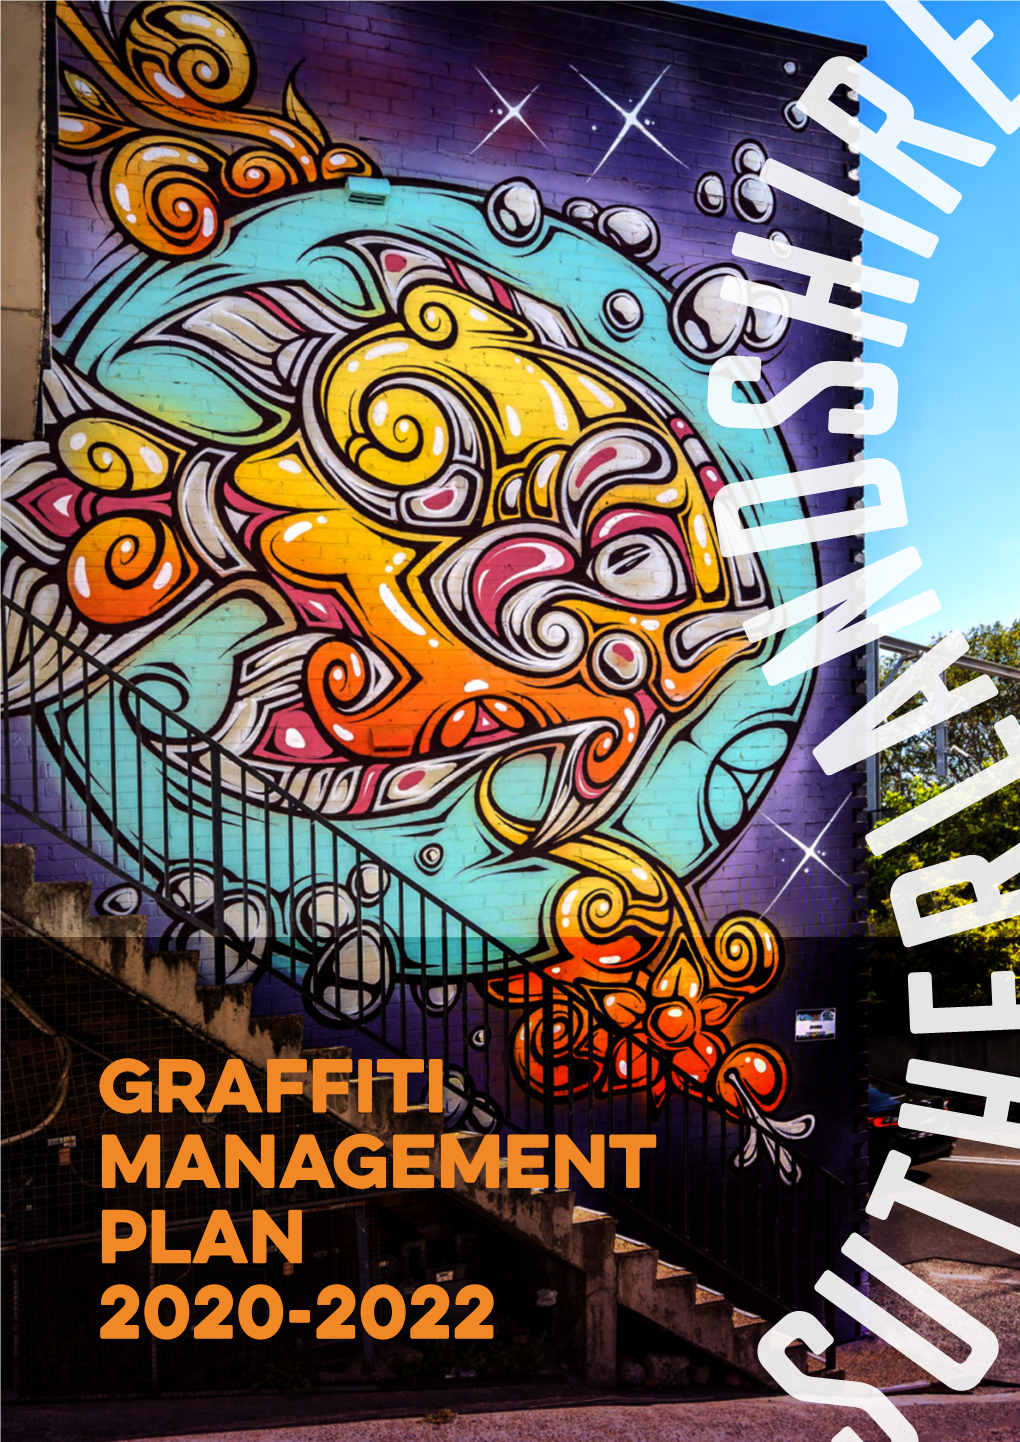 GRAFFITI MANAGEMENT PLAN 2020-2022 at Sutherland Shire Council We Do More Than Serve Our Community - We Are Our Community